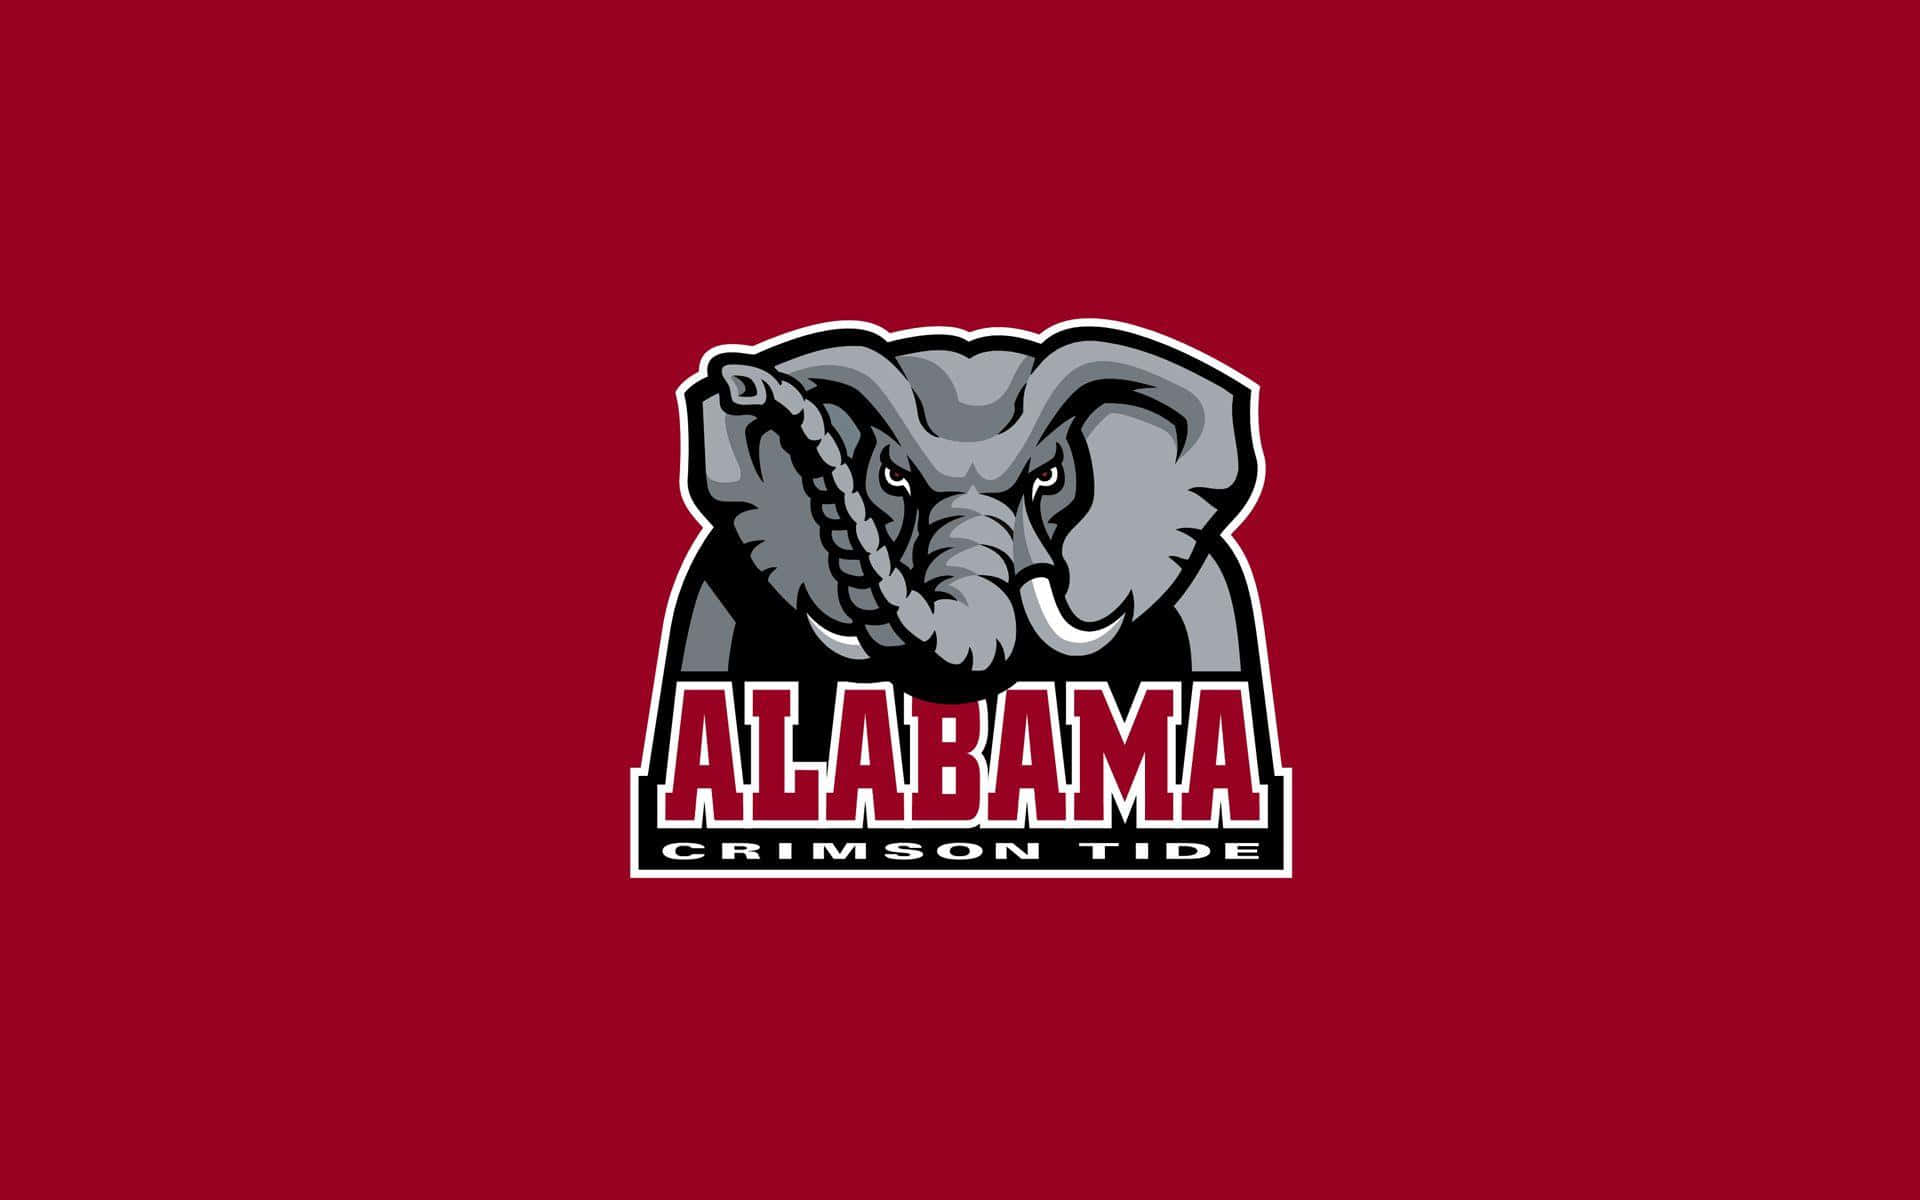 Experience the Natural Wonders of Alabama